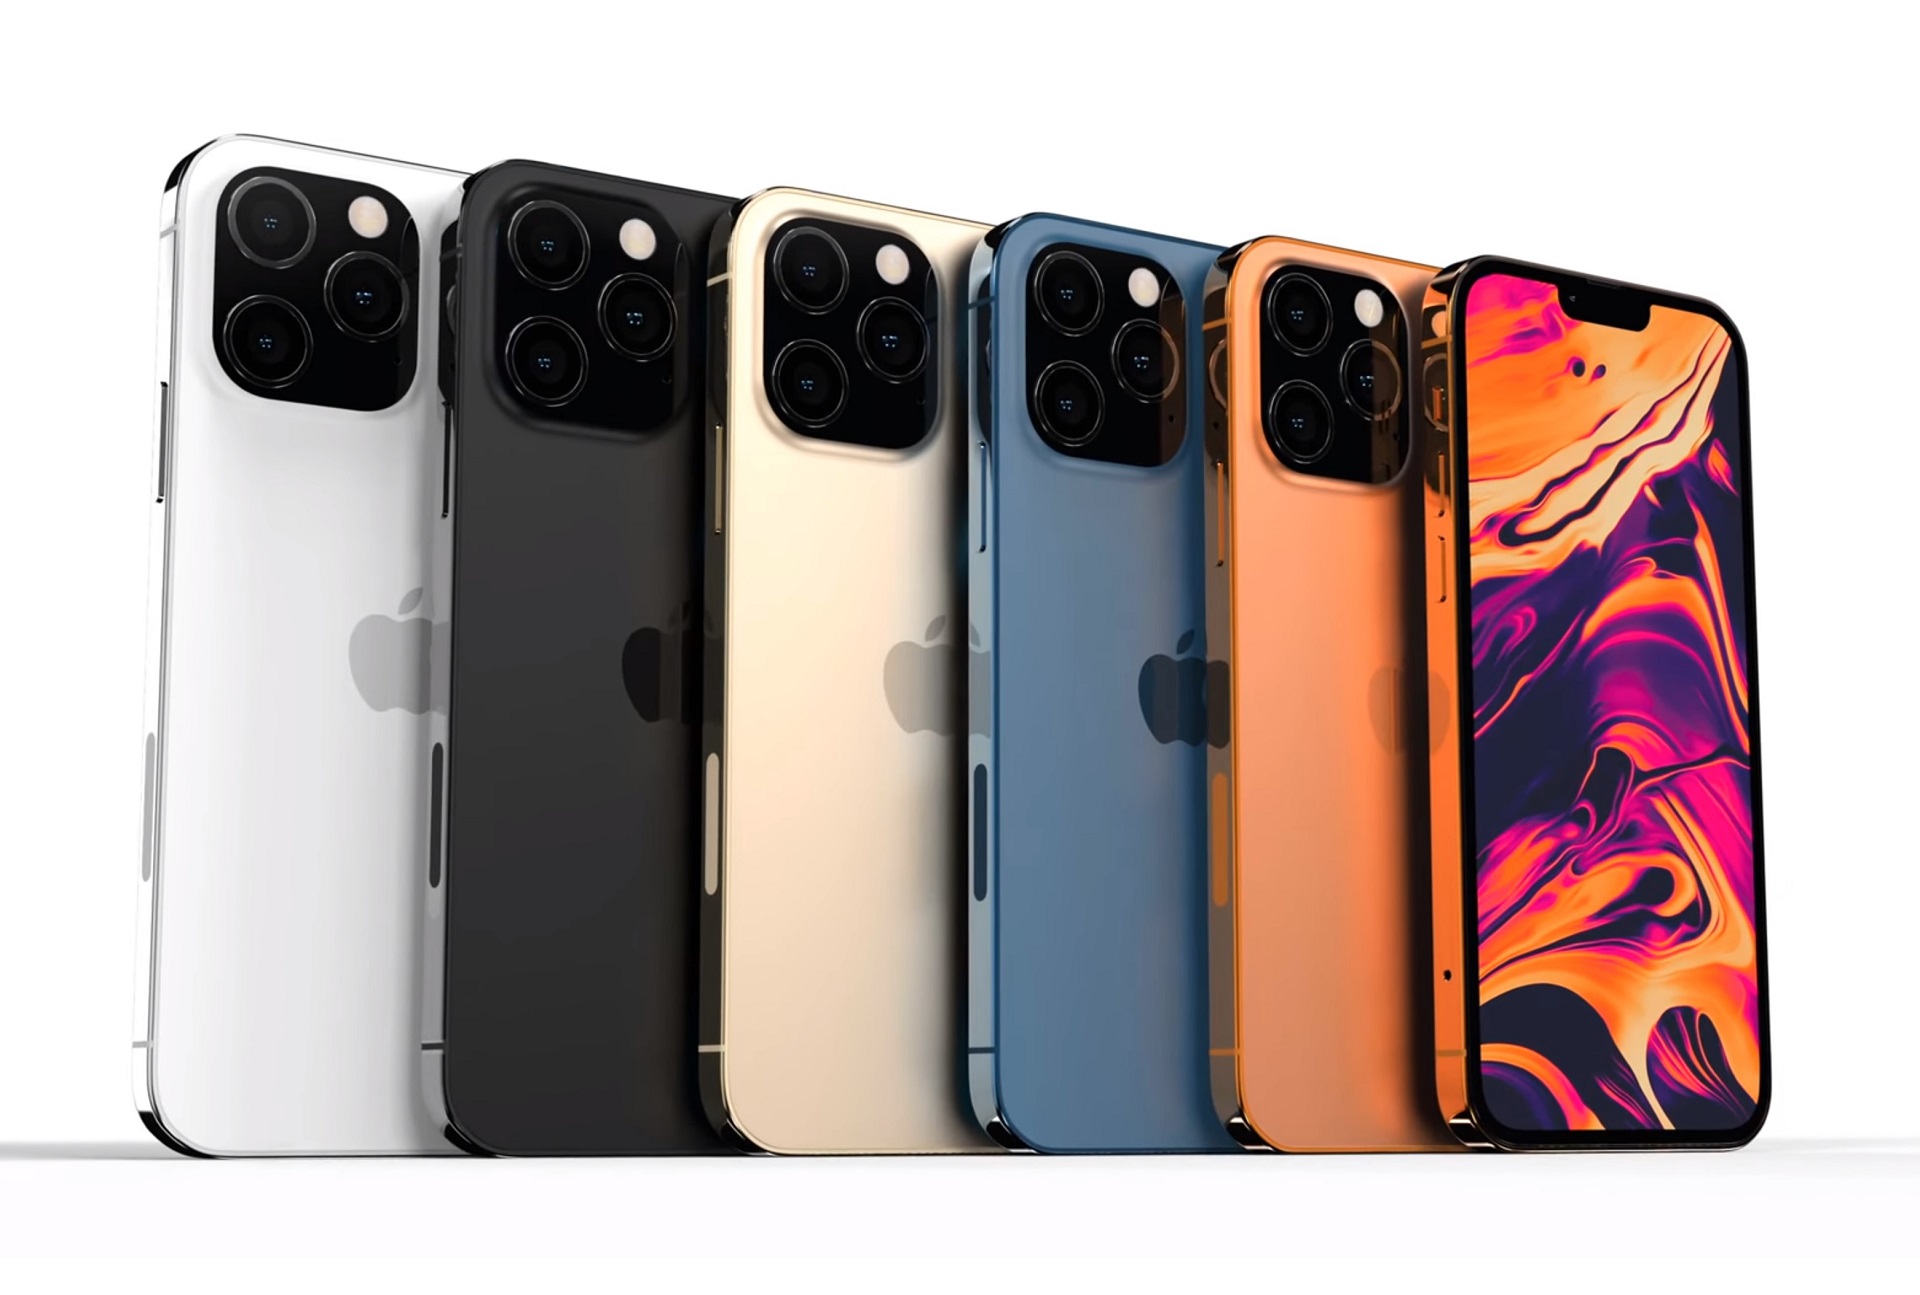 The leak of the Apple iPhone 13 series reveals 120 Hz LTPO screens, several camera improvements and new color and storage options;  AirTags will be launched for $ 39